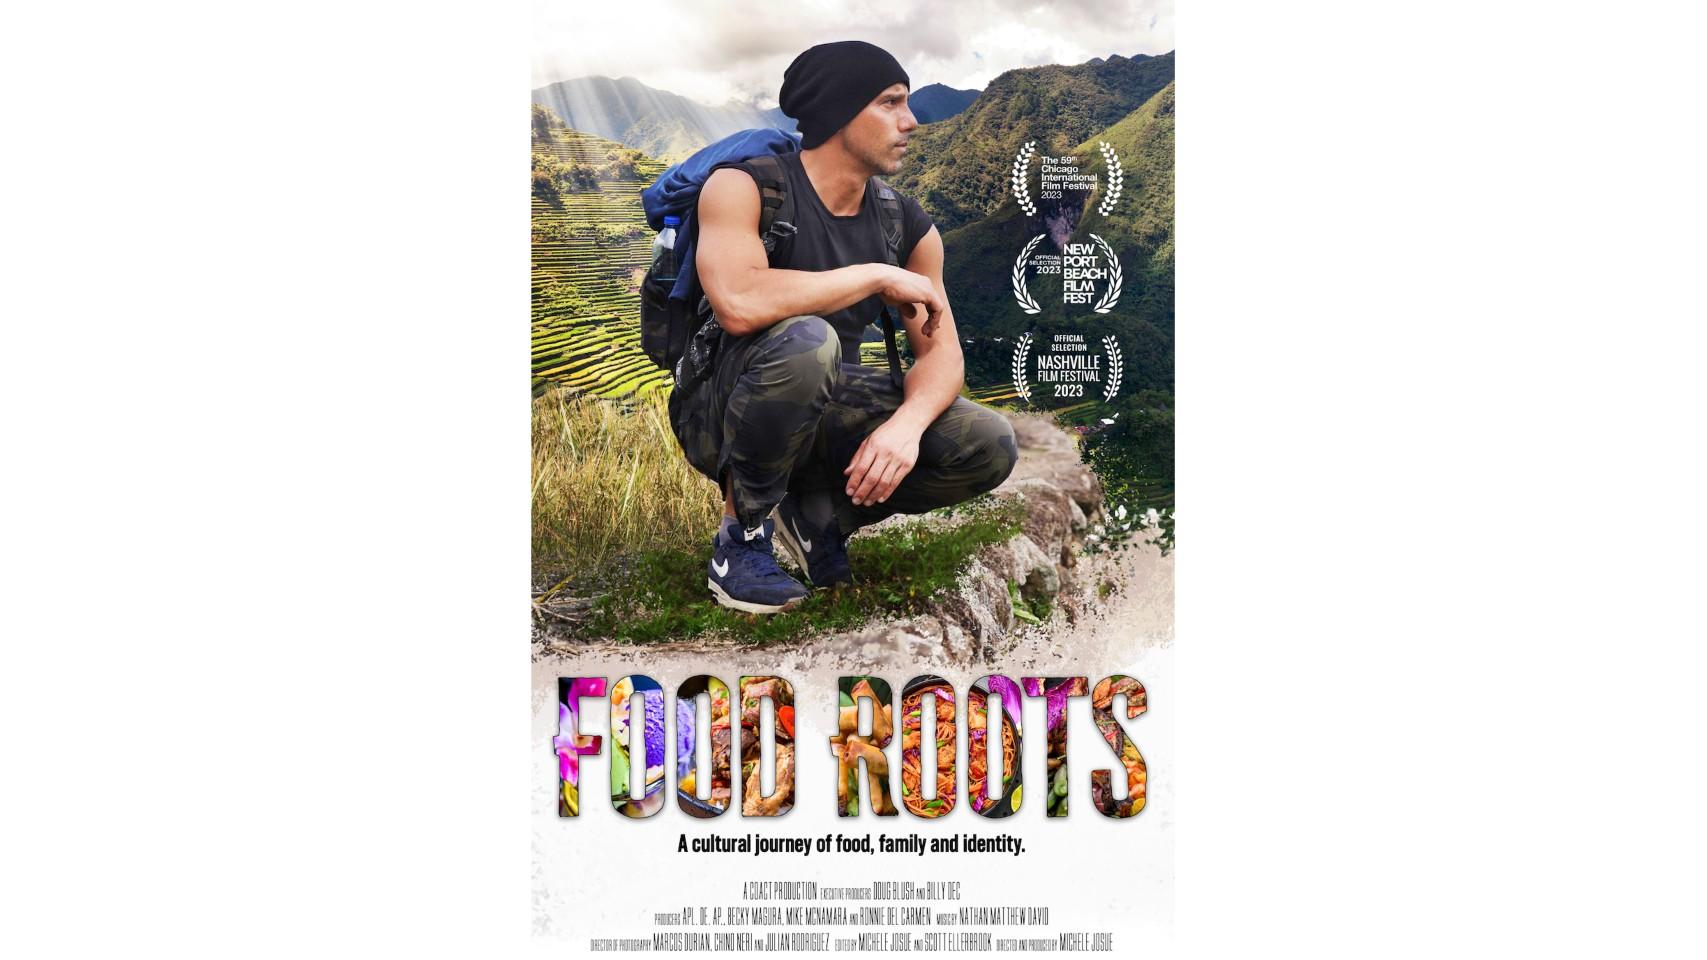 Poster for “Food Roots” documentary featuring Chicago restaurant owner and TV personality Billy Dec. (Courtesy of COACT Agency)